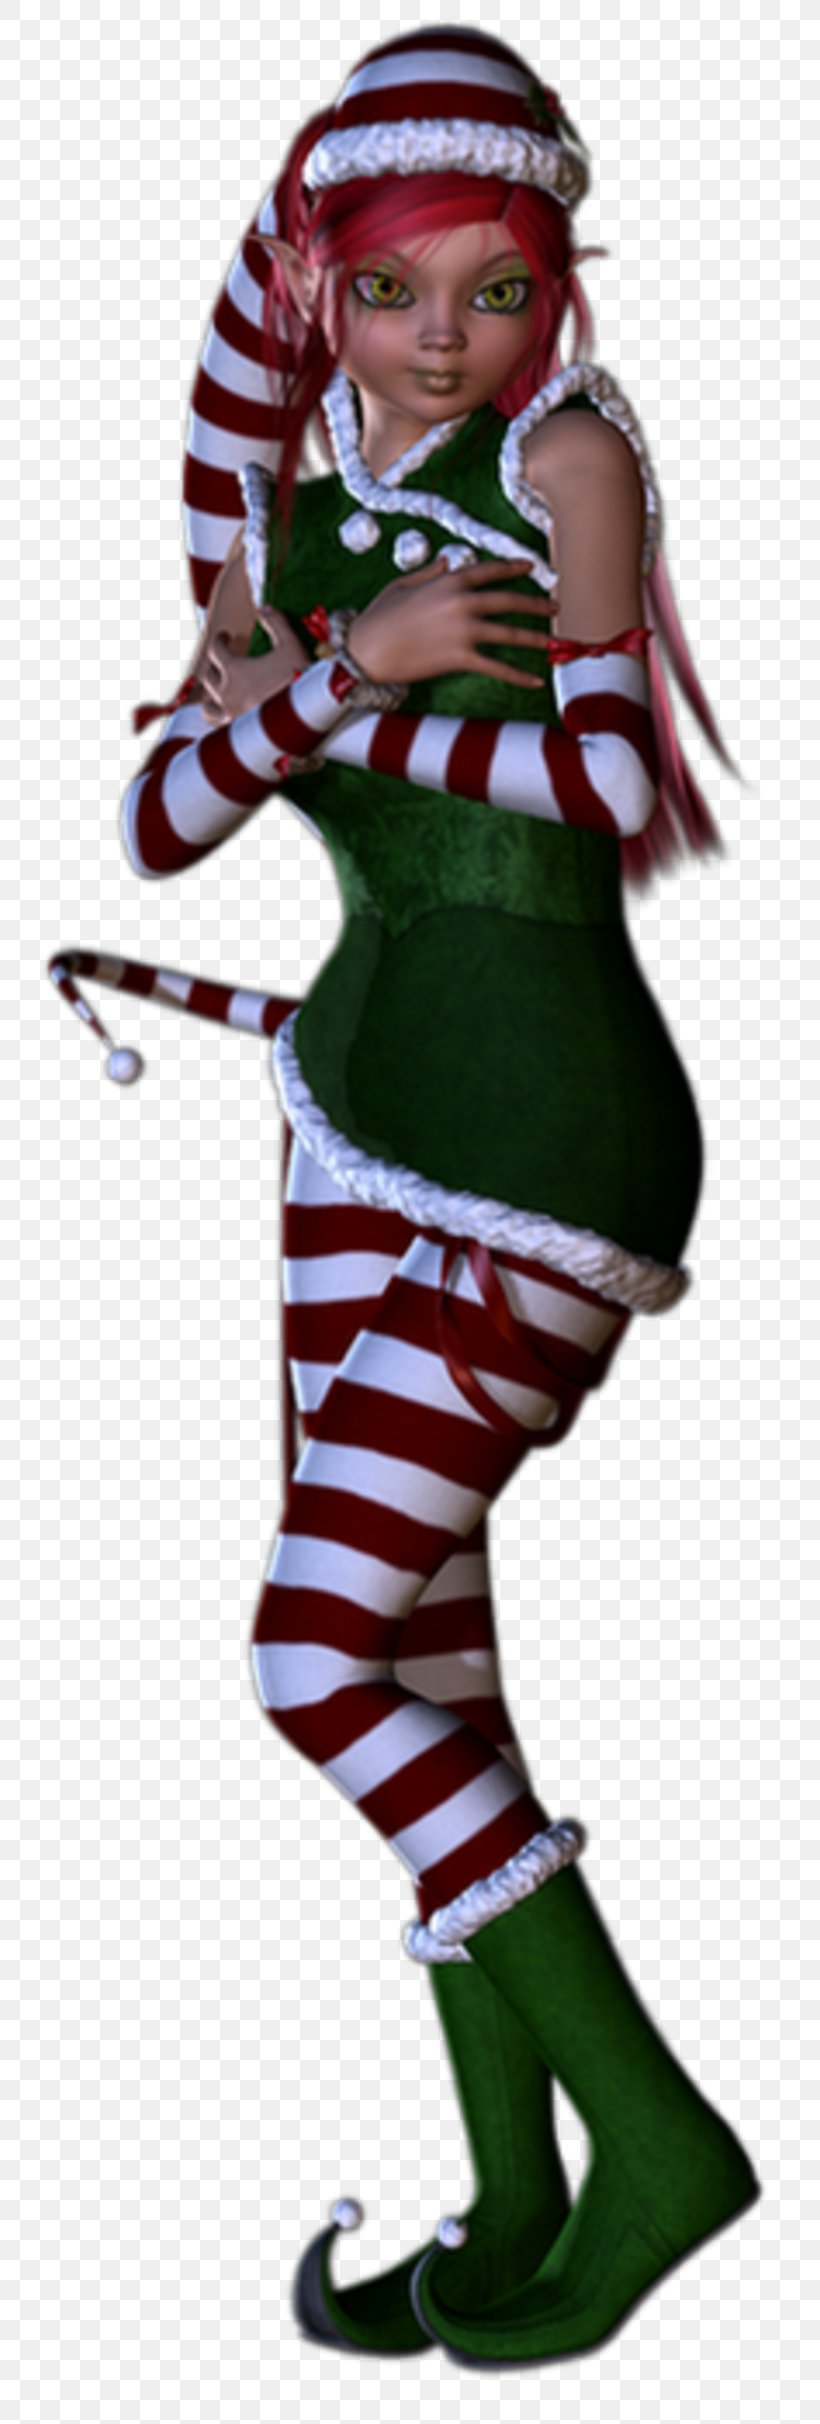 Elf Christmas Lutin Costume Duende, PNG, 800x2424px, Elf, Christmas, Christmas Elf, Christmas Ornament, Costume Download Free